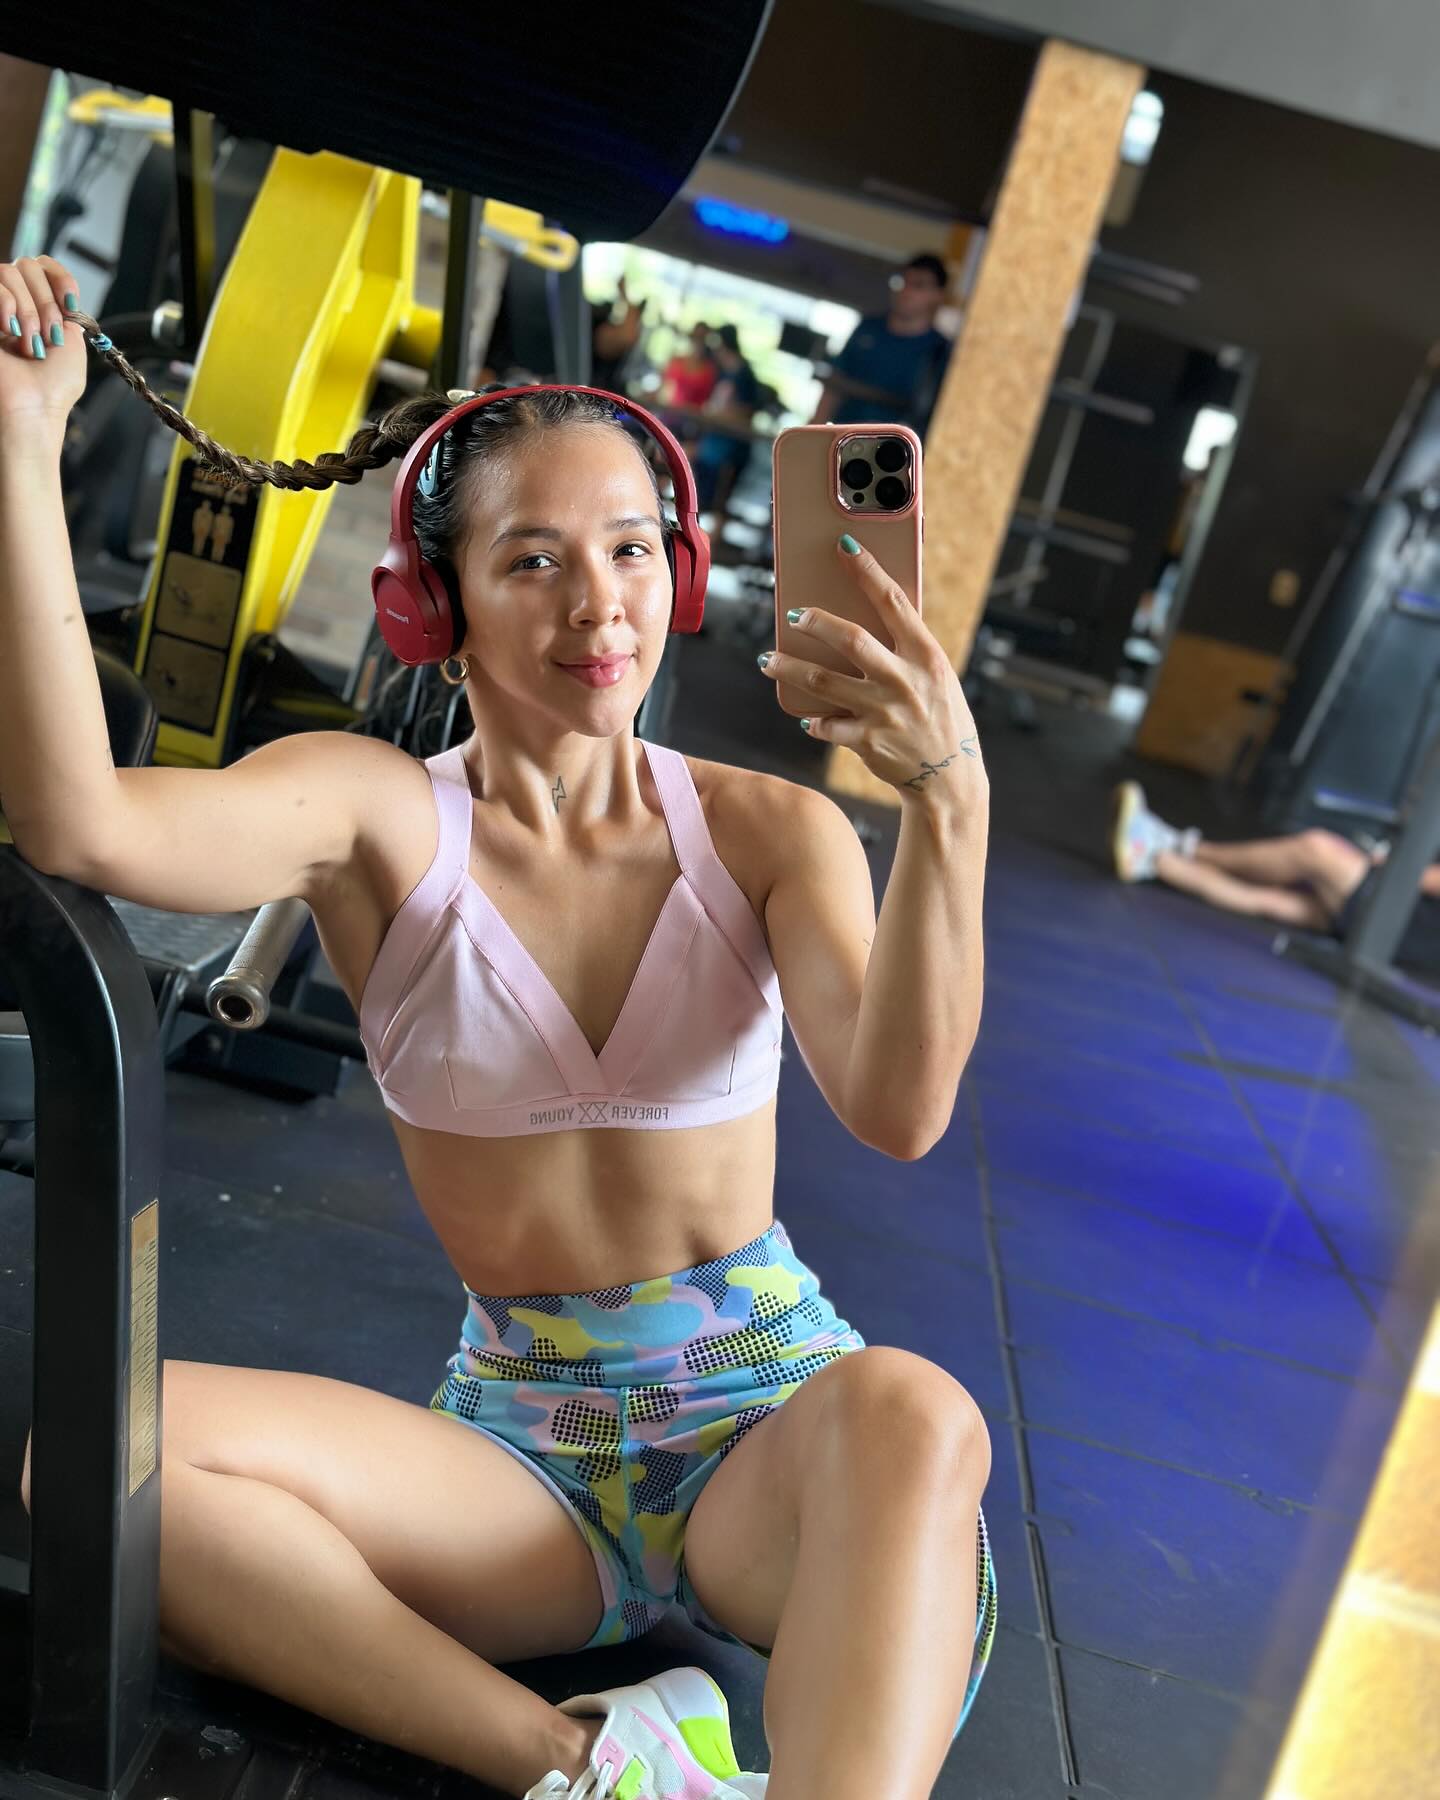 Do you. Like girls with muscles?💪🏼 

#ad #gymmotivation #selfietime #content